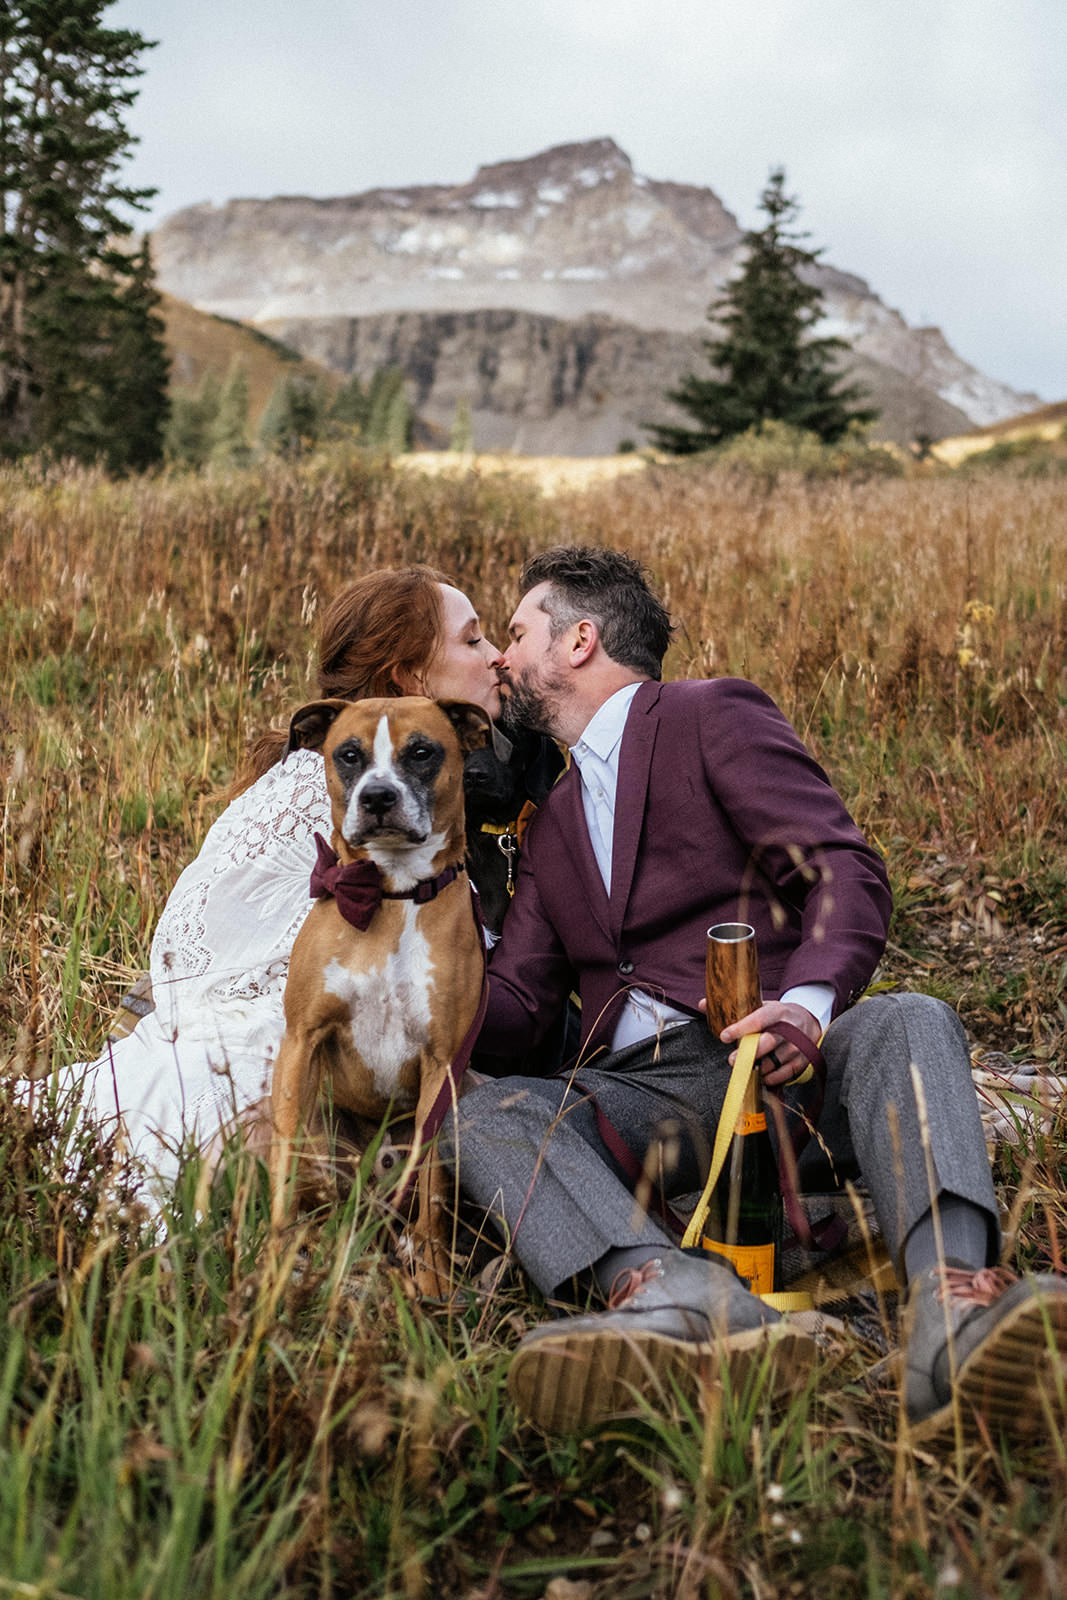 Bride and groom kiss at Colorado mountain elopement with adorable dog in a bowtie sitting in front of them stealing the show